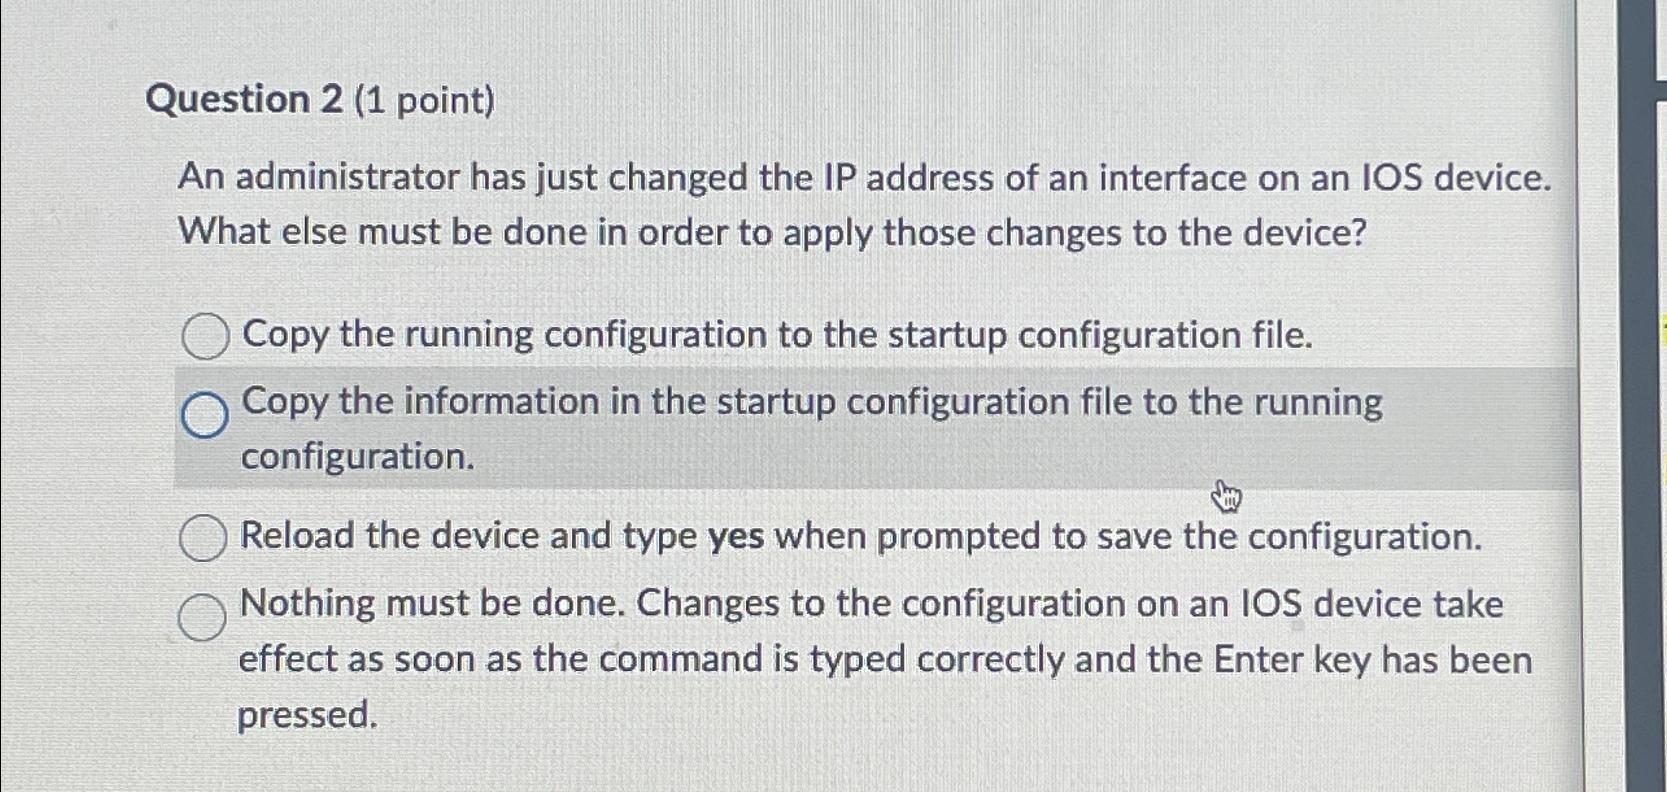 Question 2 (1 point) An administrator has just changed the IP address of an interface on an IOS device. What